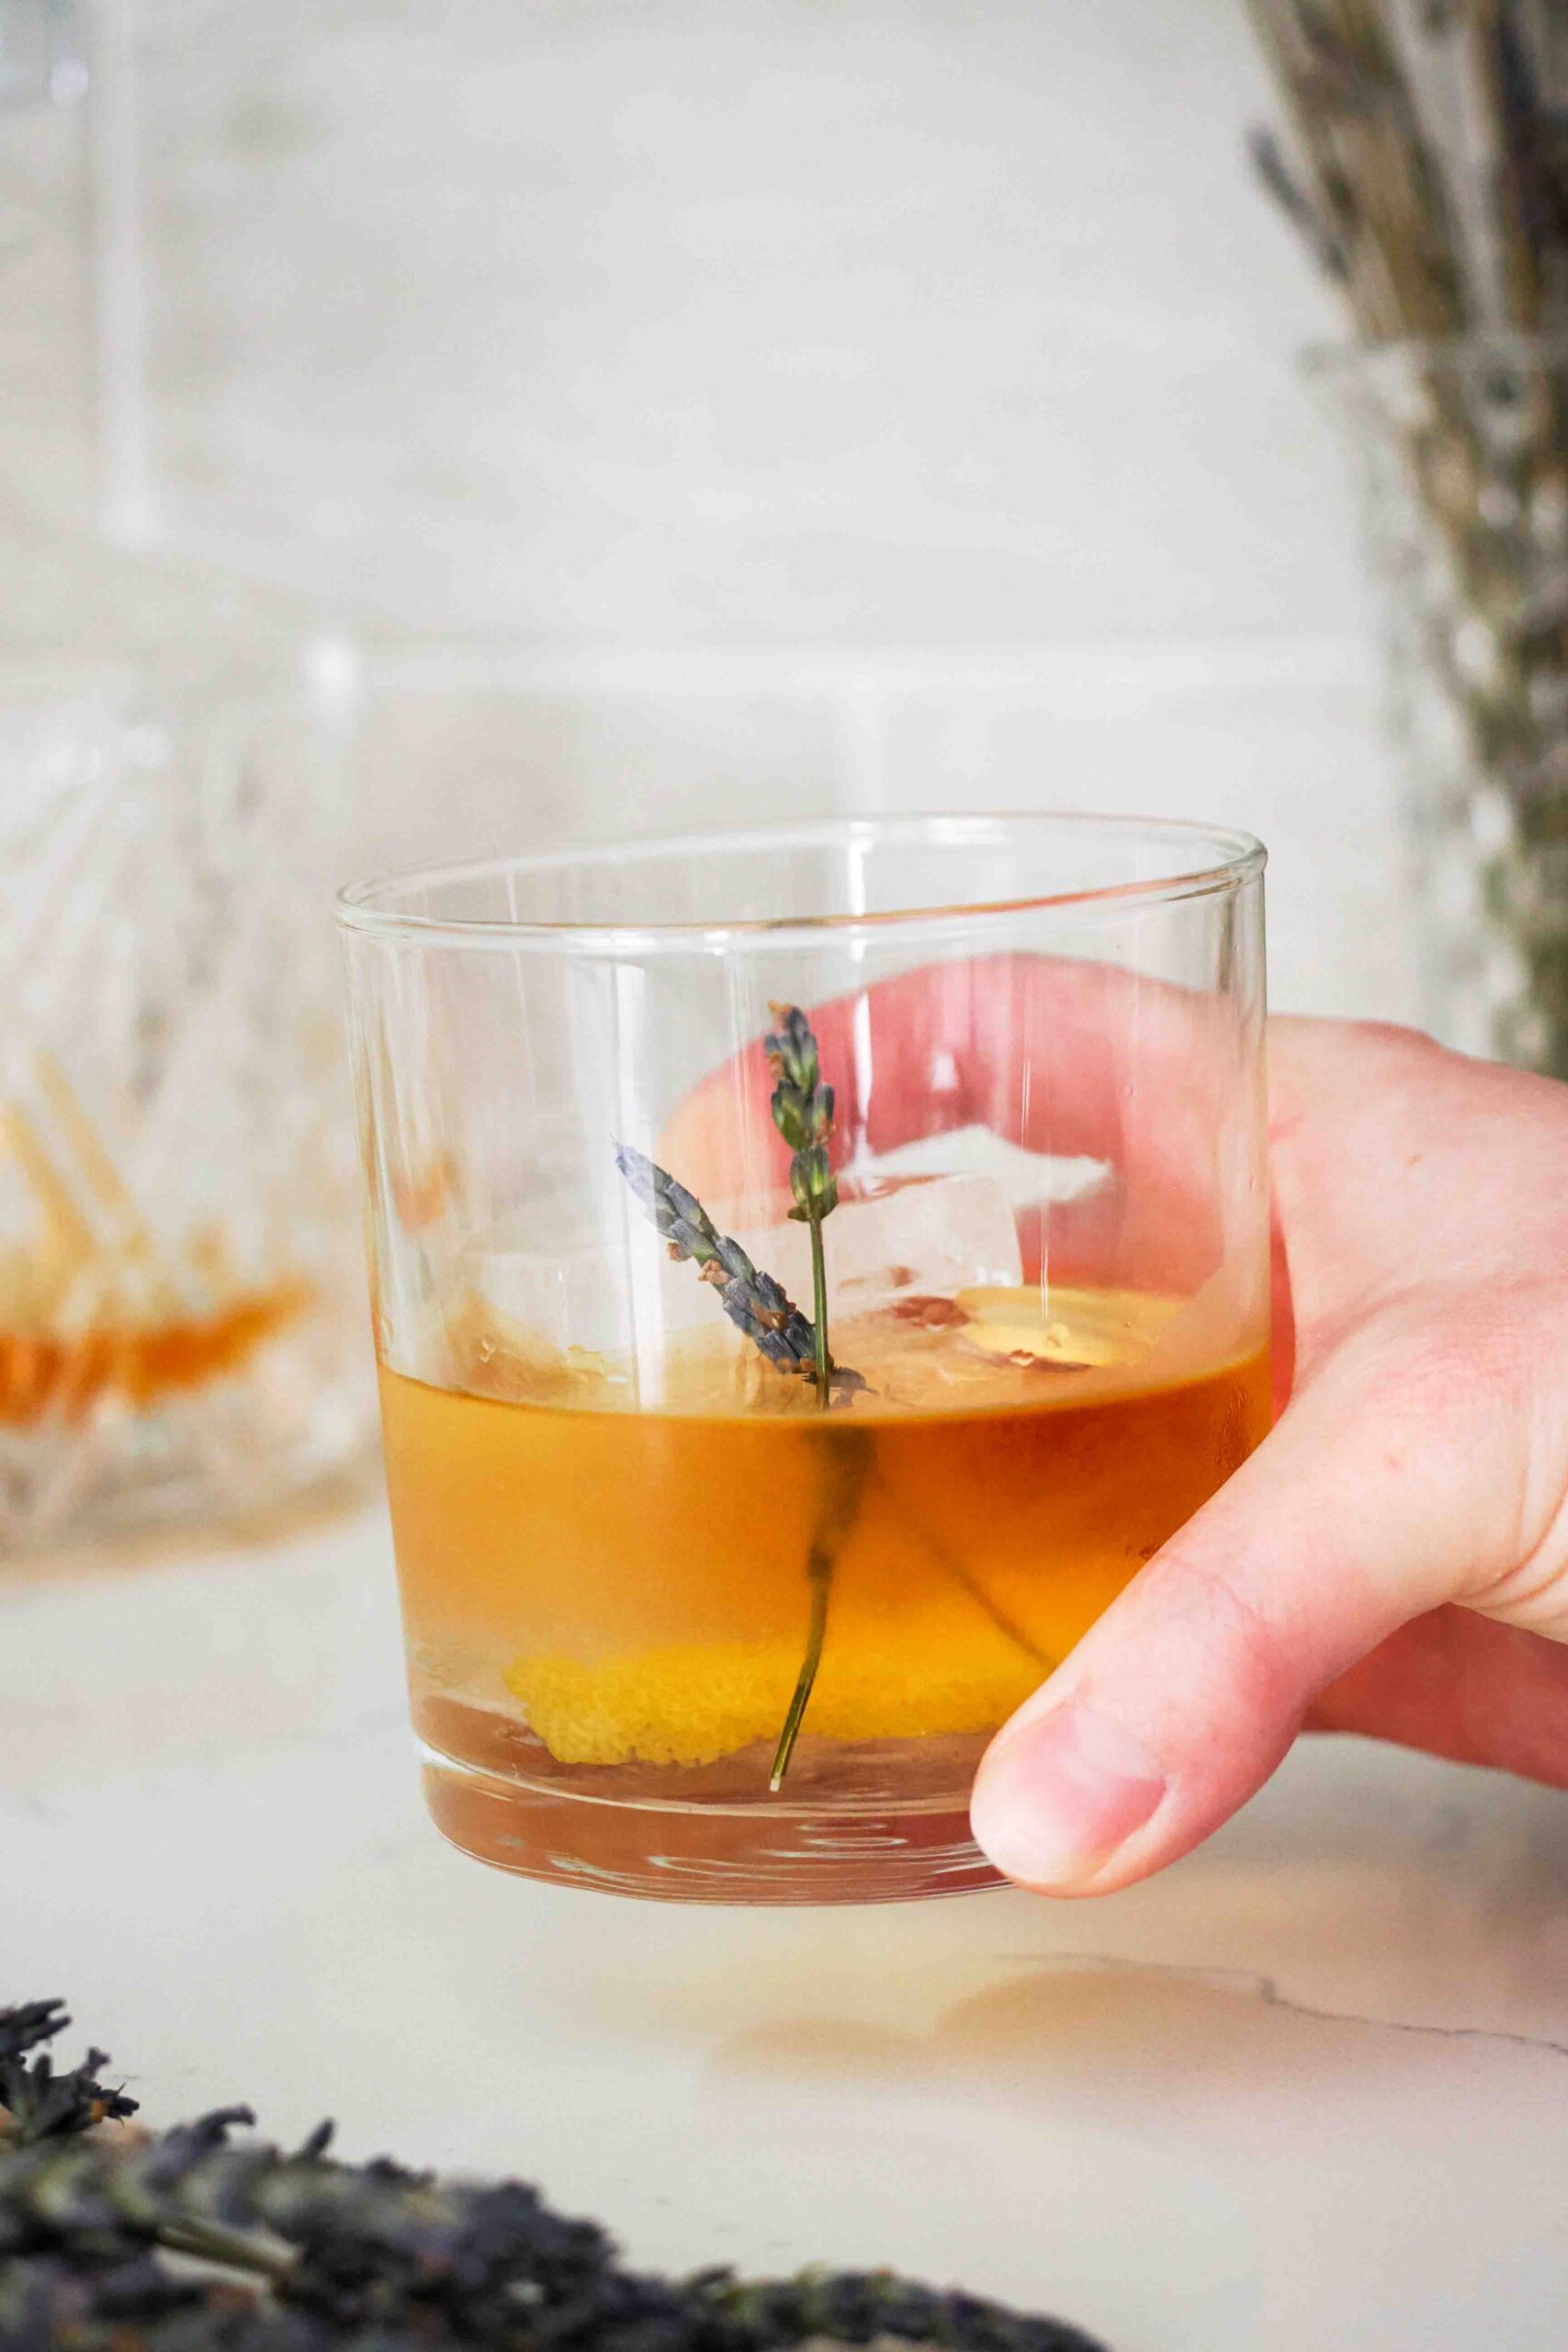 A hand picks up a rocks glass filled with a lavender old fashioned.